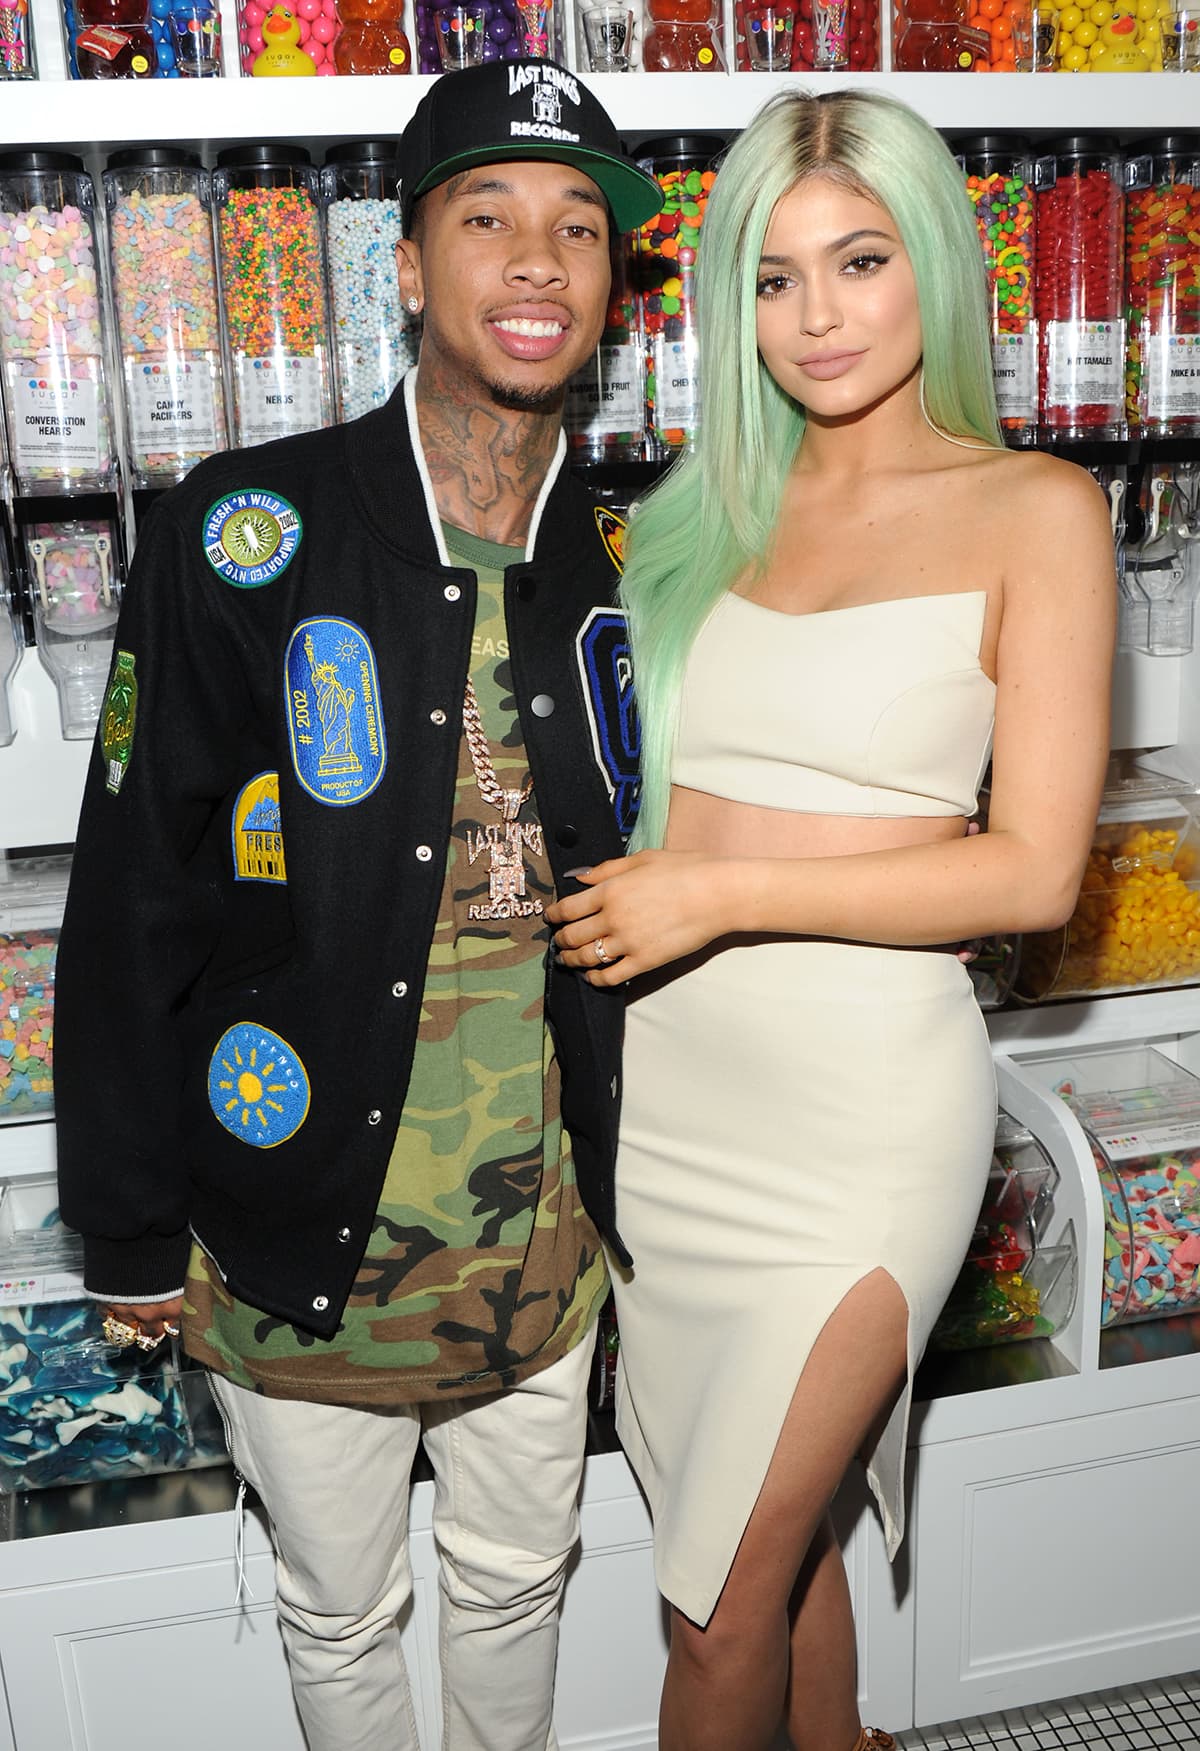 Tyga and Kylie Jenner were in an on-and-off relationship until 2017